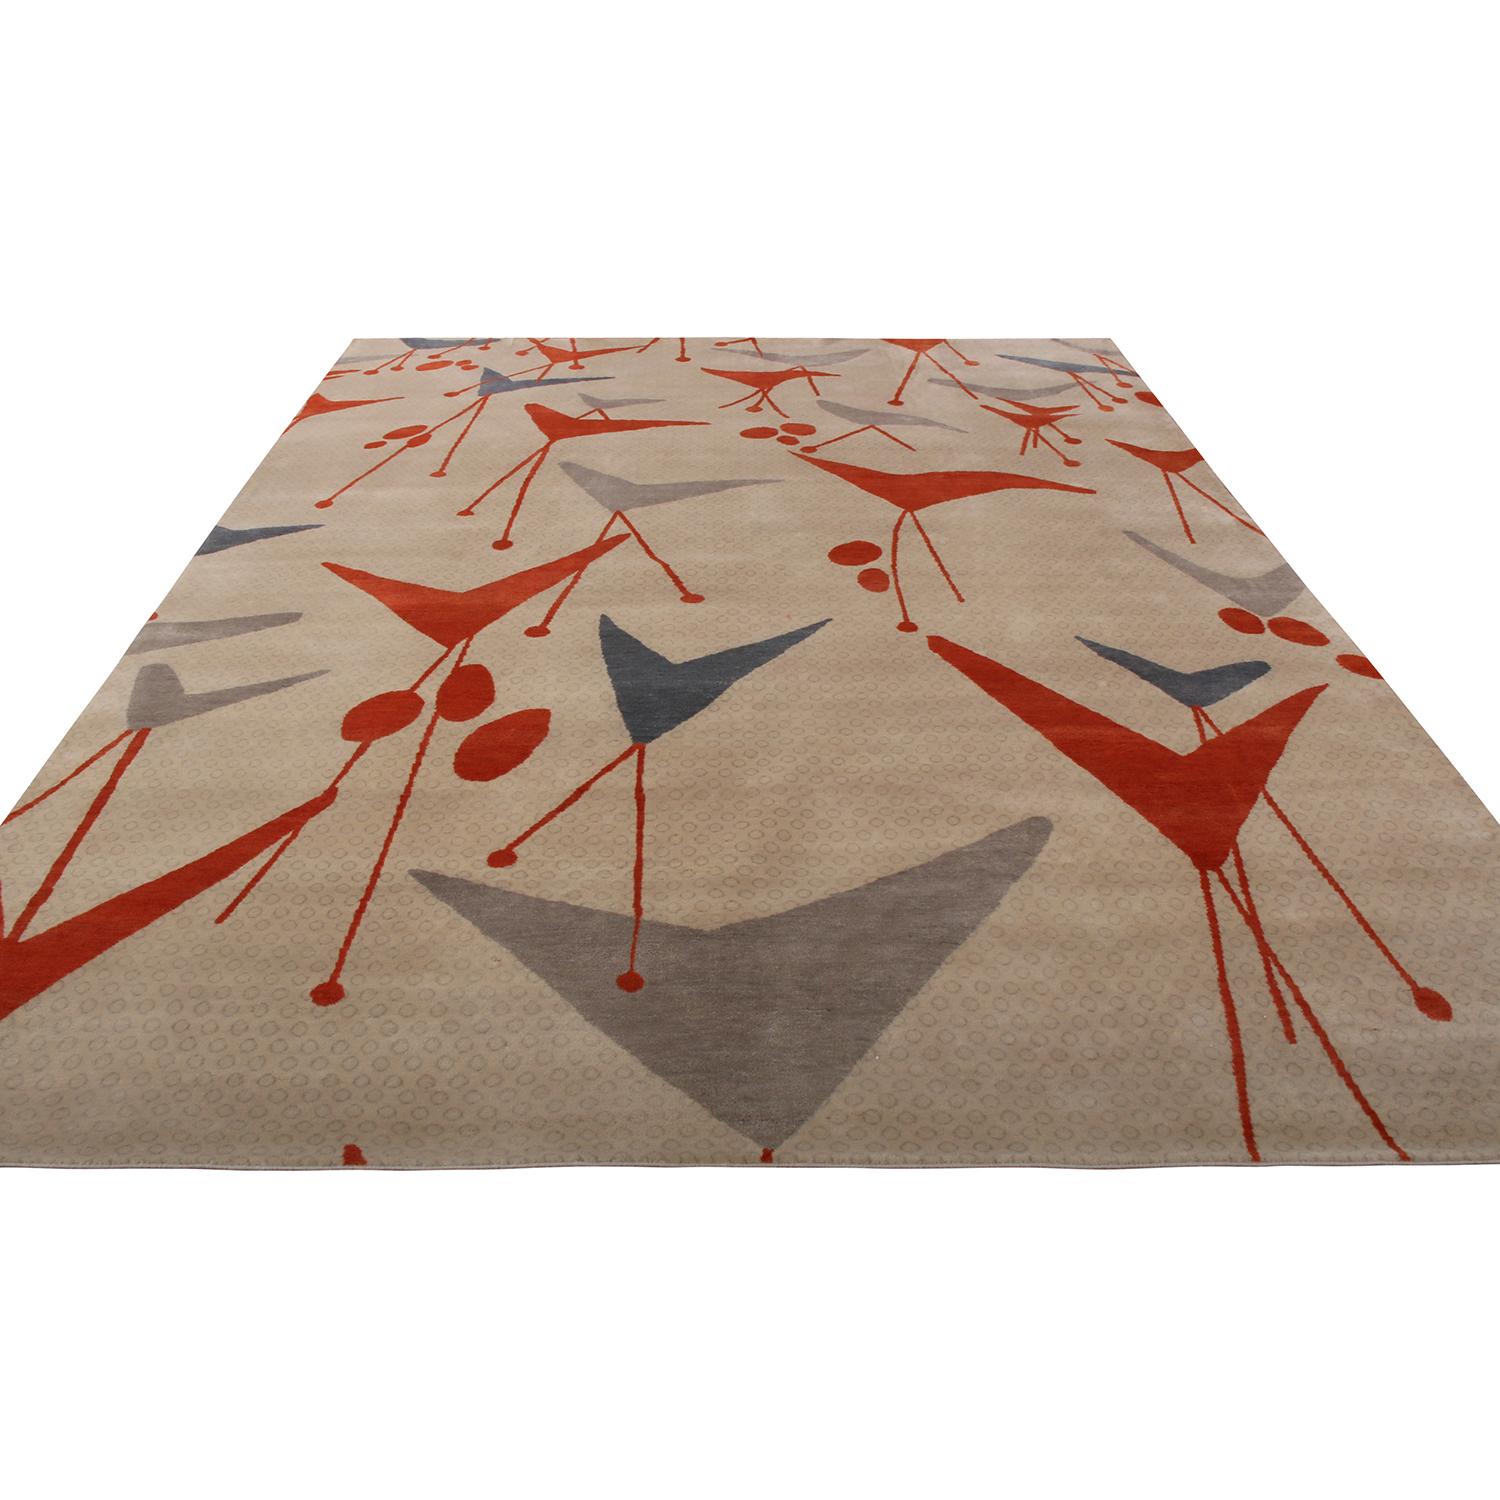 Crafted with hand knotted wool, natural silk and exotic yarns, Rug & Kilim’s geometric rug hails from the latest prized additions to their acclaimed Mid-Century Modern Collection, a bold custom-capable line recapturing an underrepresented, iconic